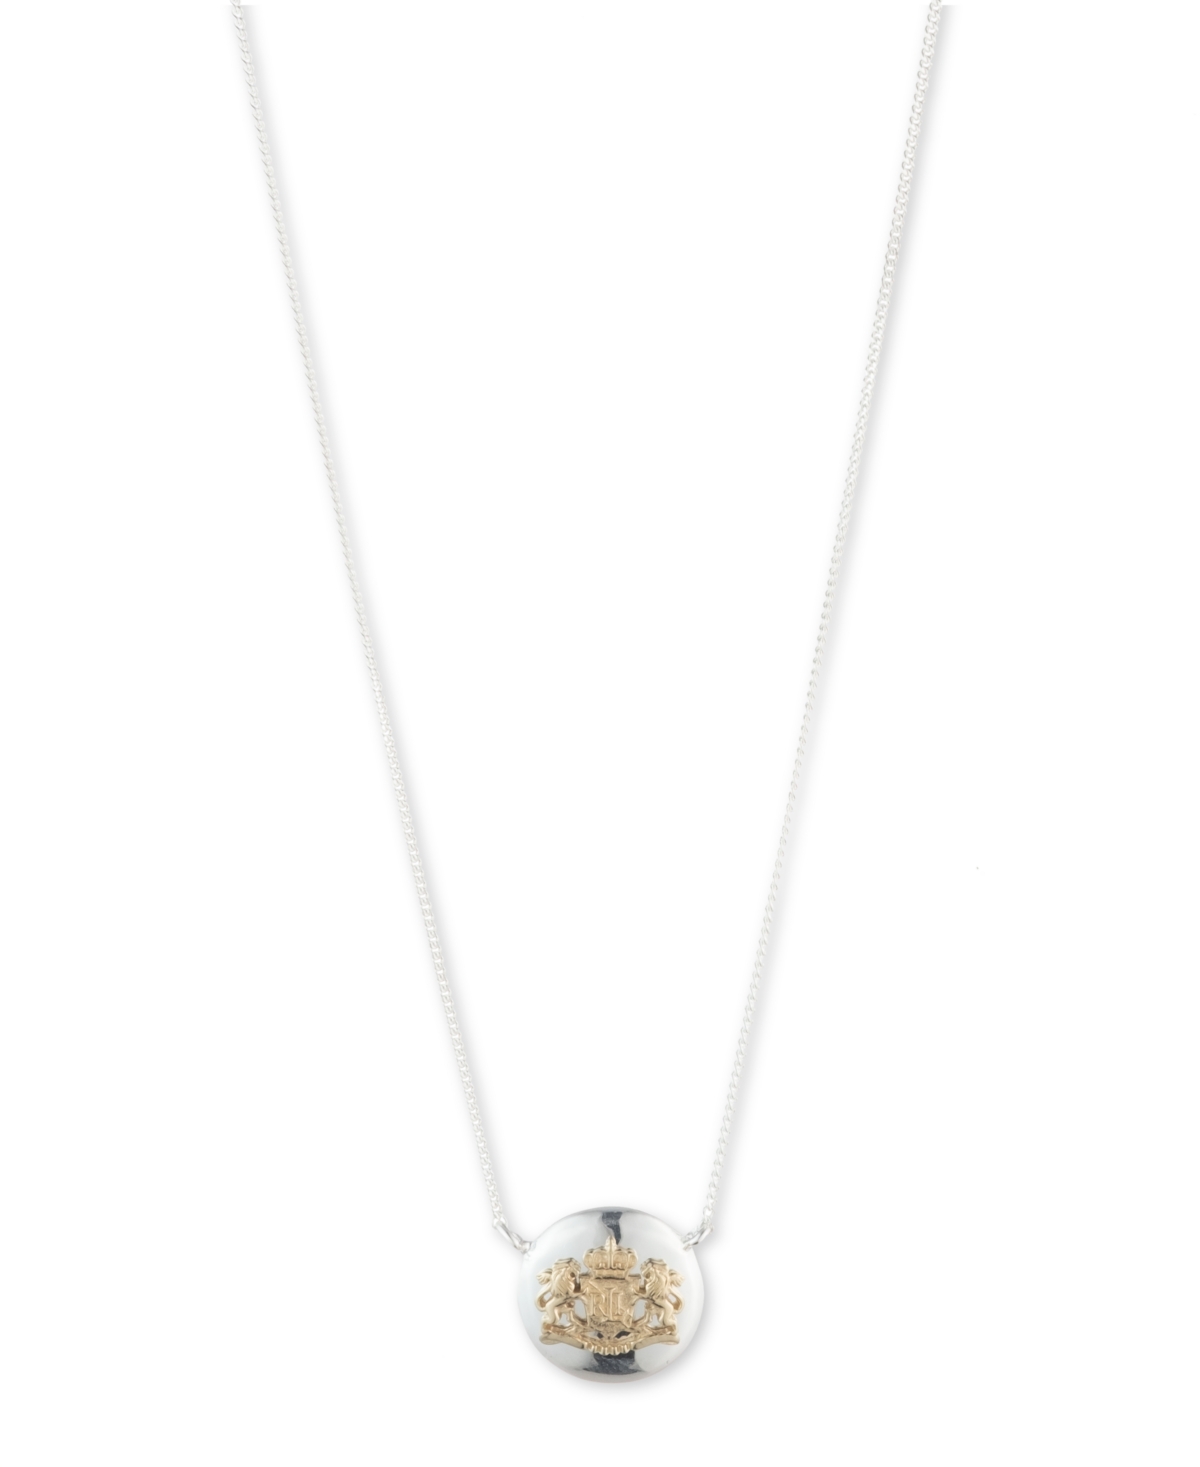 Lauren Ralph Lauren Sterling Silver Chain With 18k Gold Over Sterling Silver Crest Pendant Necklace In Two Tone